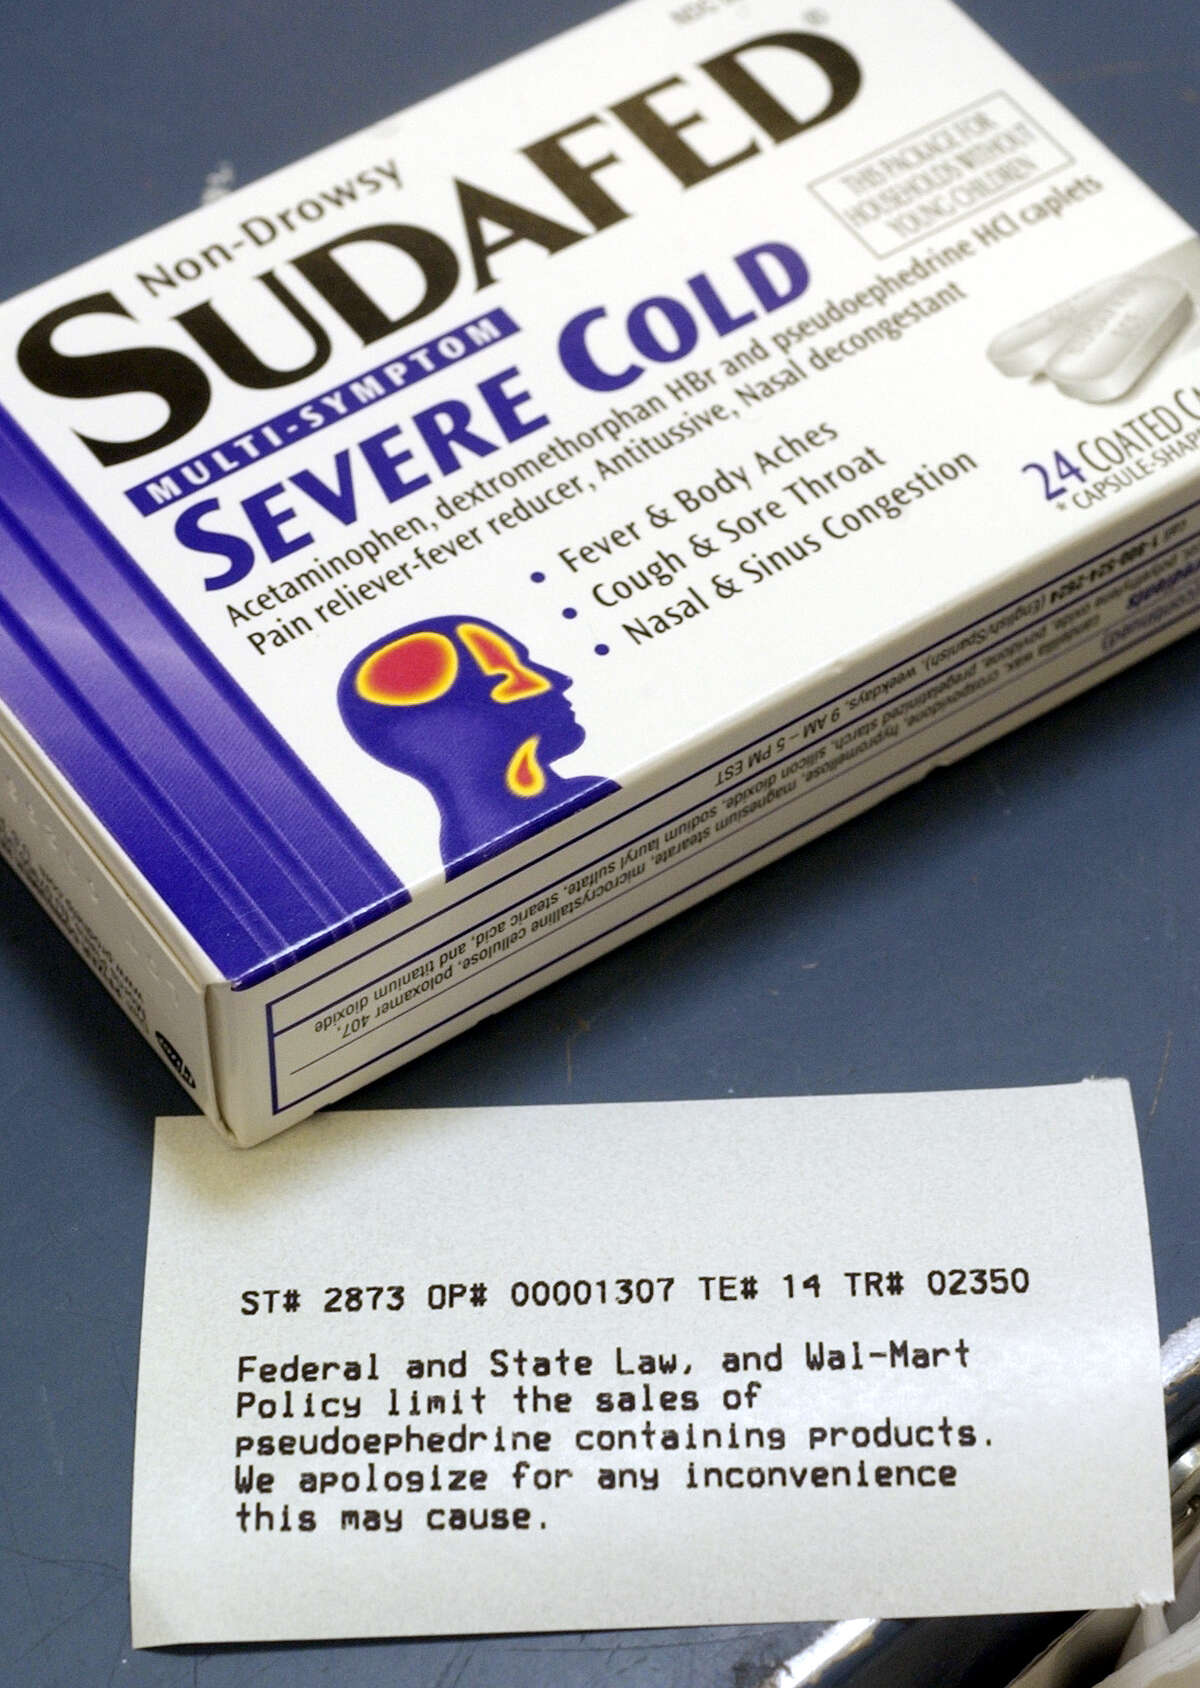 Oral decongestants, such as Sudafed, reduce nasal pressure and can be used in combination with antihistamines. Don't take decongestants if you have high blood pressure. Insomnia is a common side effect. Nonprescription decongestant nasal sprays, such as Afrin, are effective but shouldn't be used for more than a few days at a time or allergy symptoms will worsen.